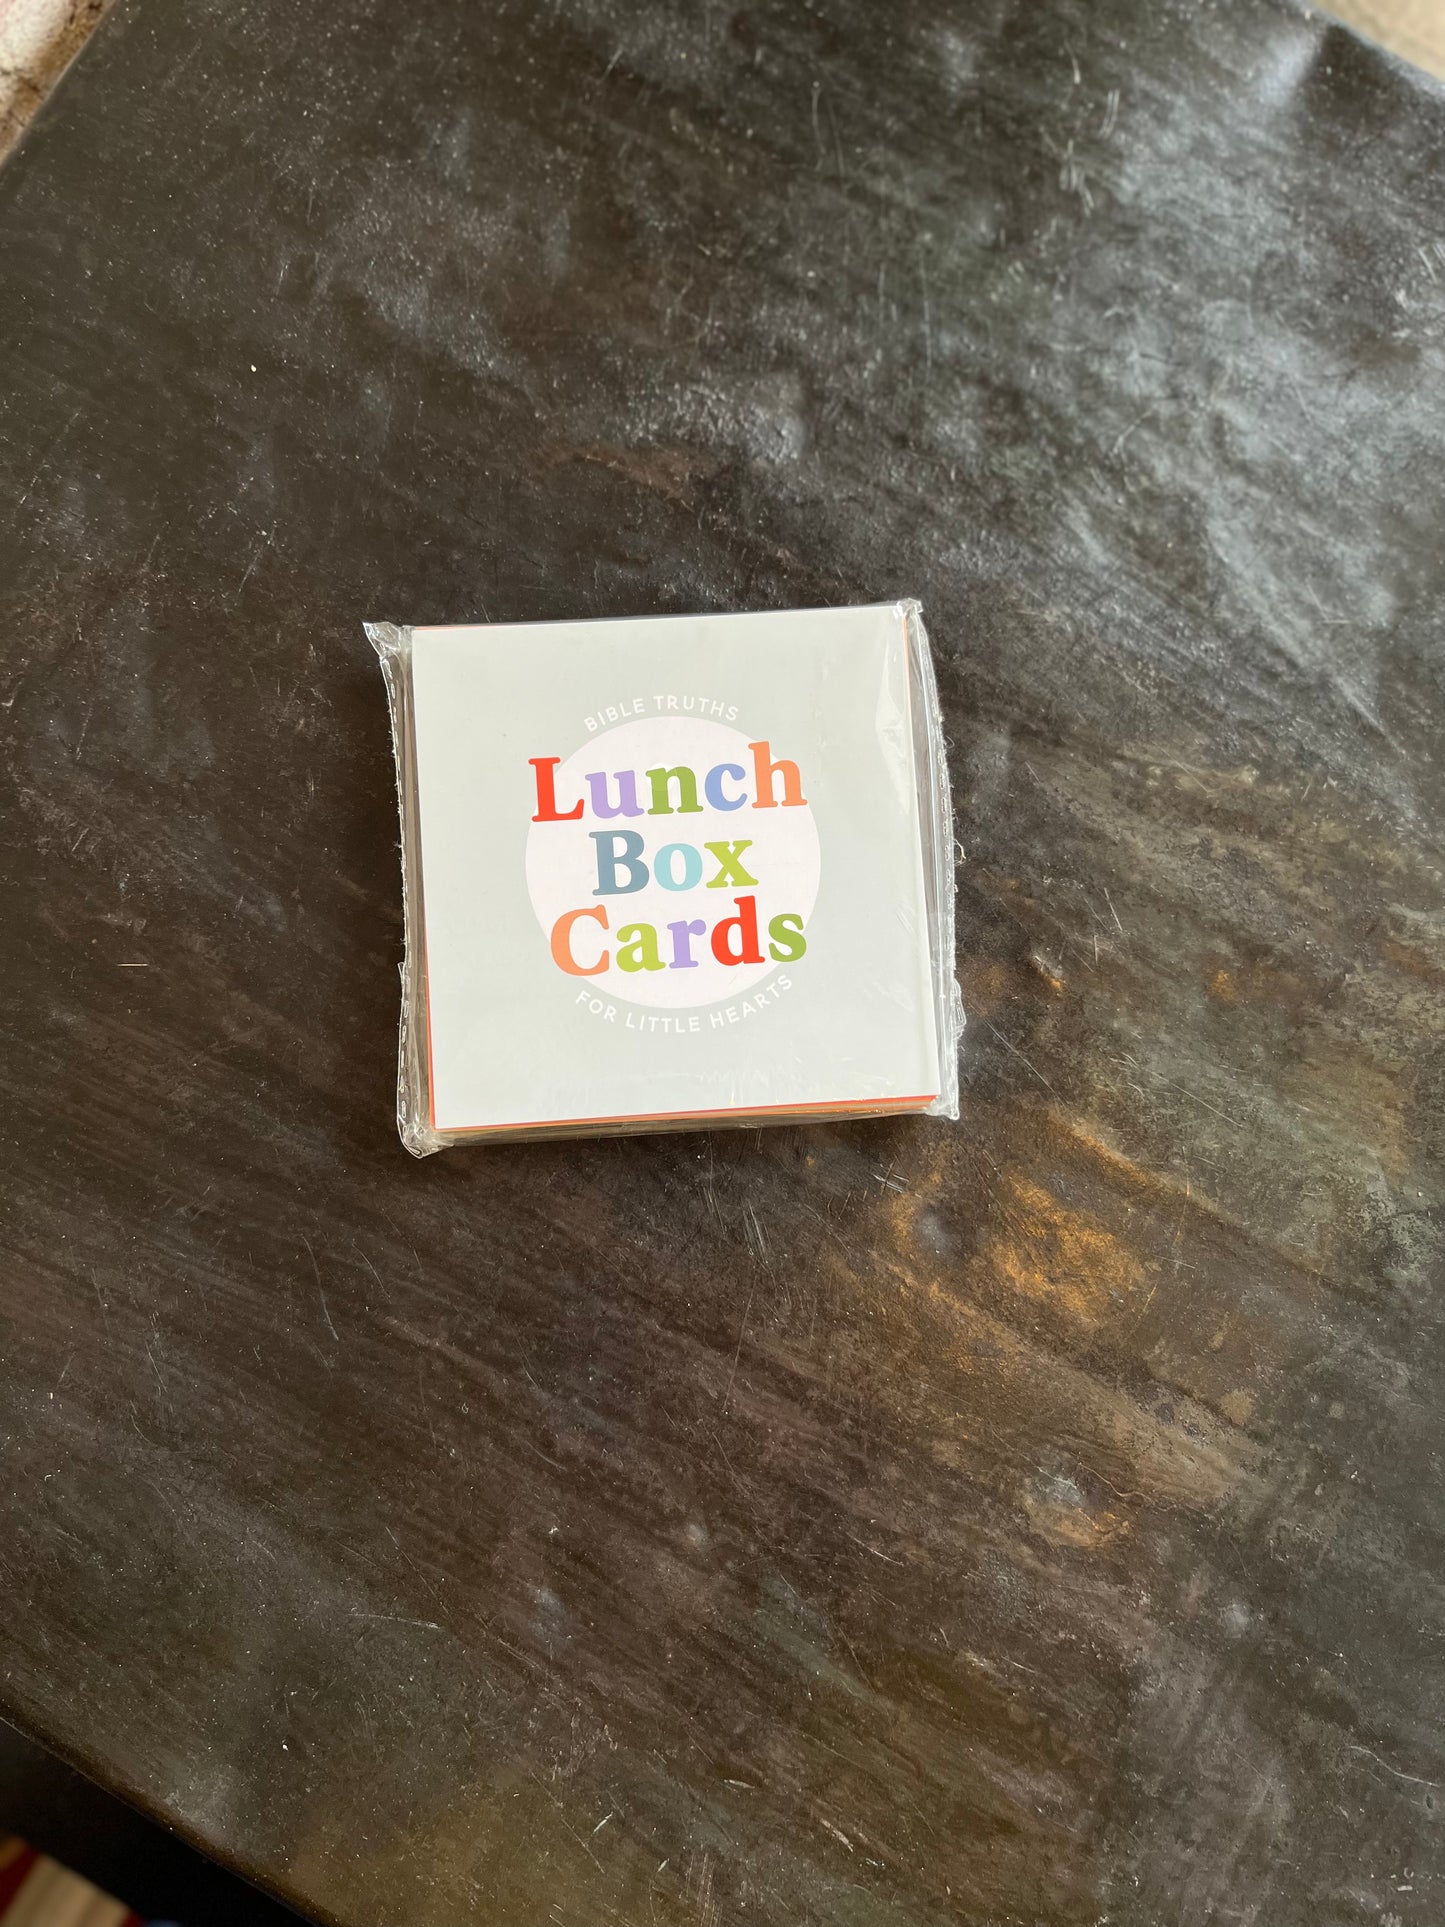 Lunch Box Cards- Bible Truths for Kids